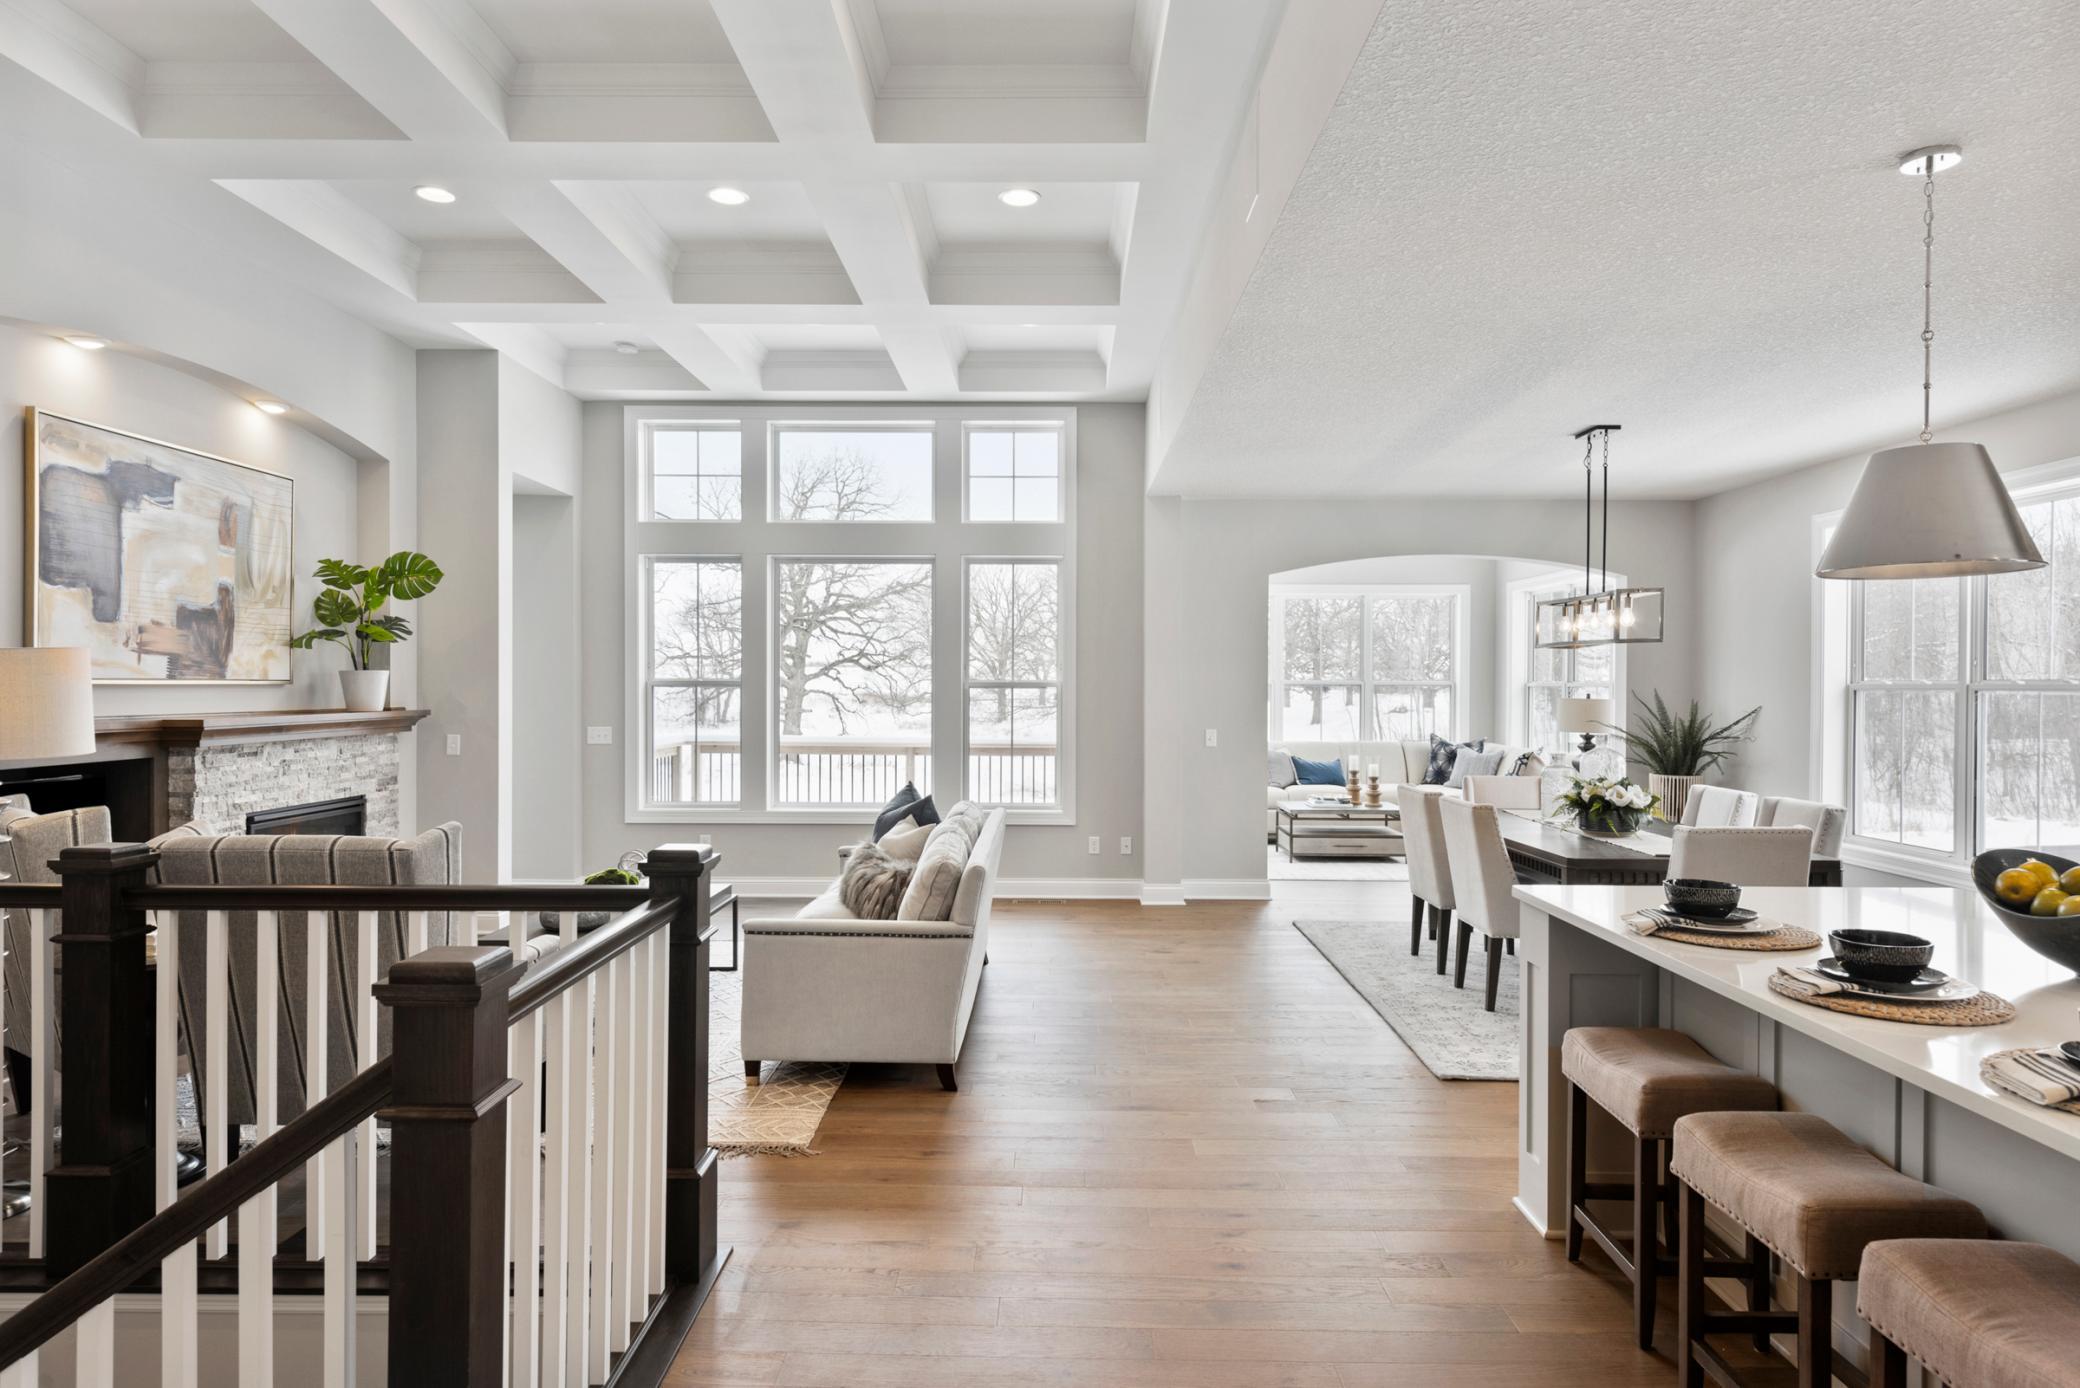 Single Level Living at its best! Association-maintained single family homes currently under construction at Harvest West in Chaska! Dramatic 12' high coffered ceilings in gathering room.